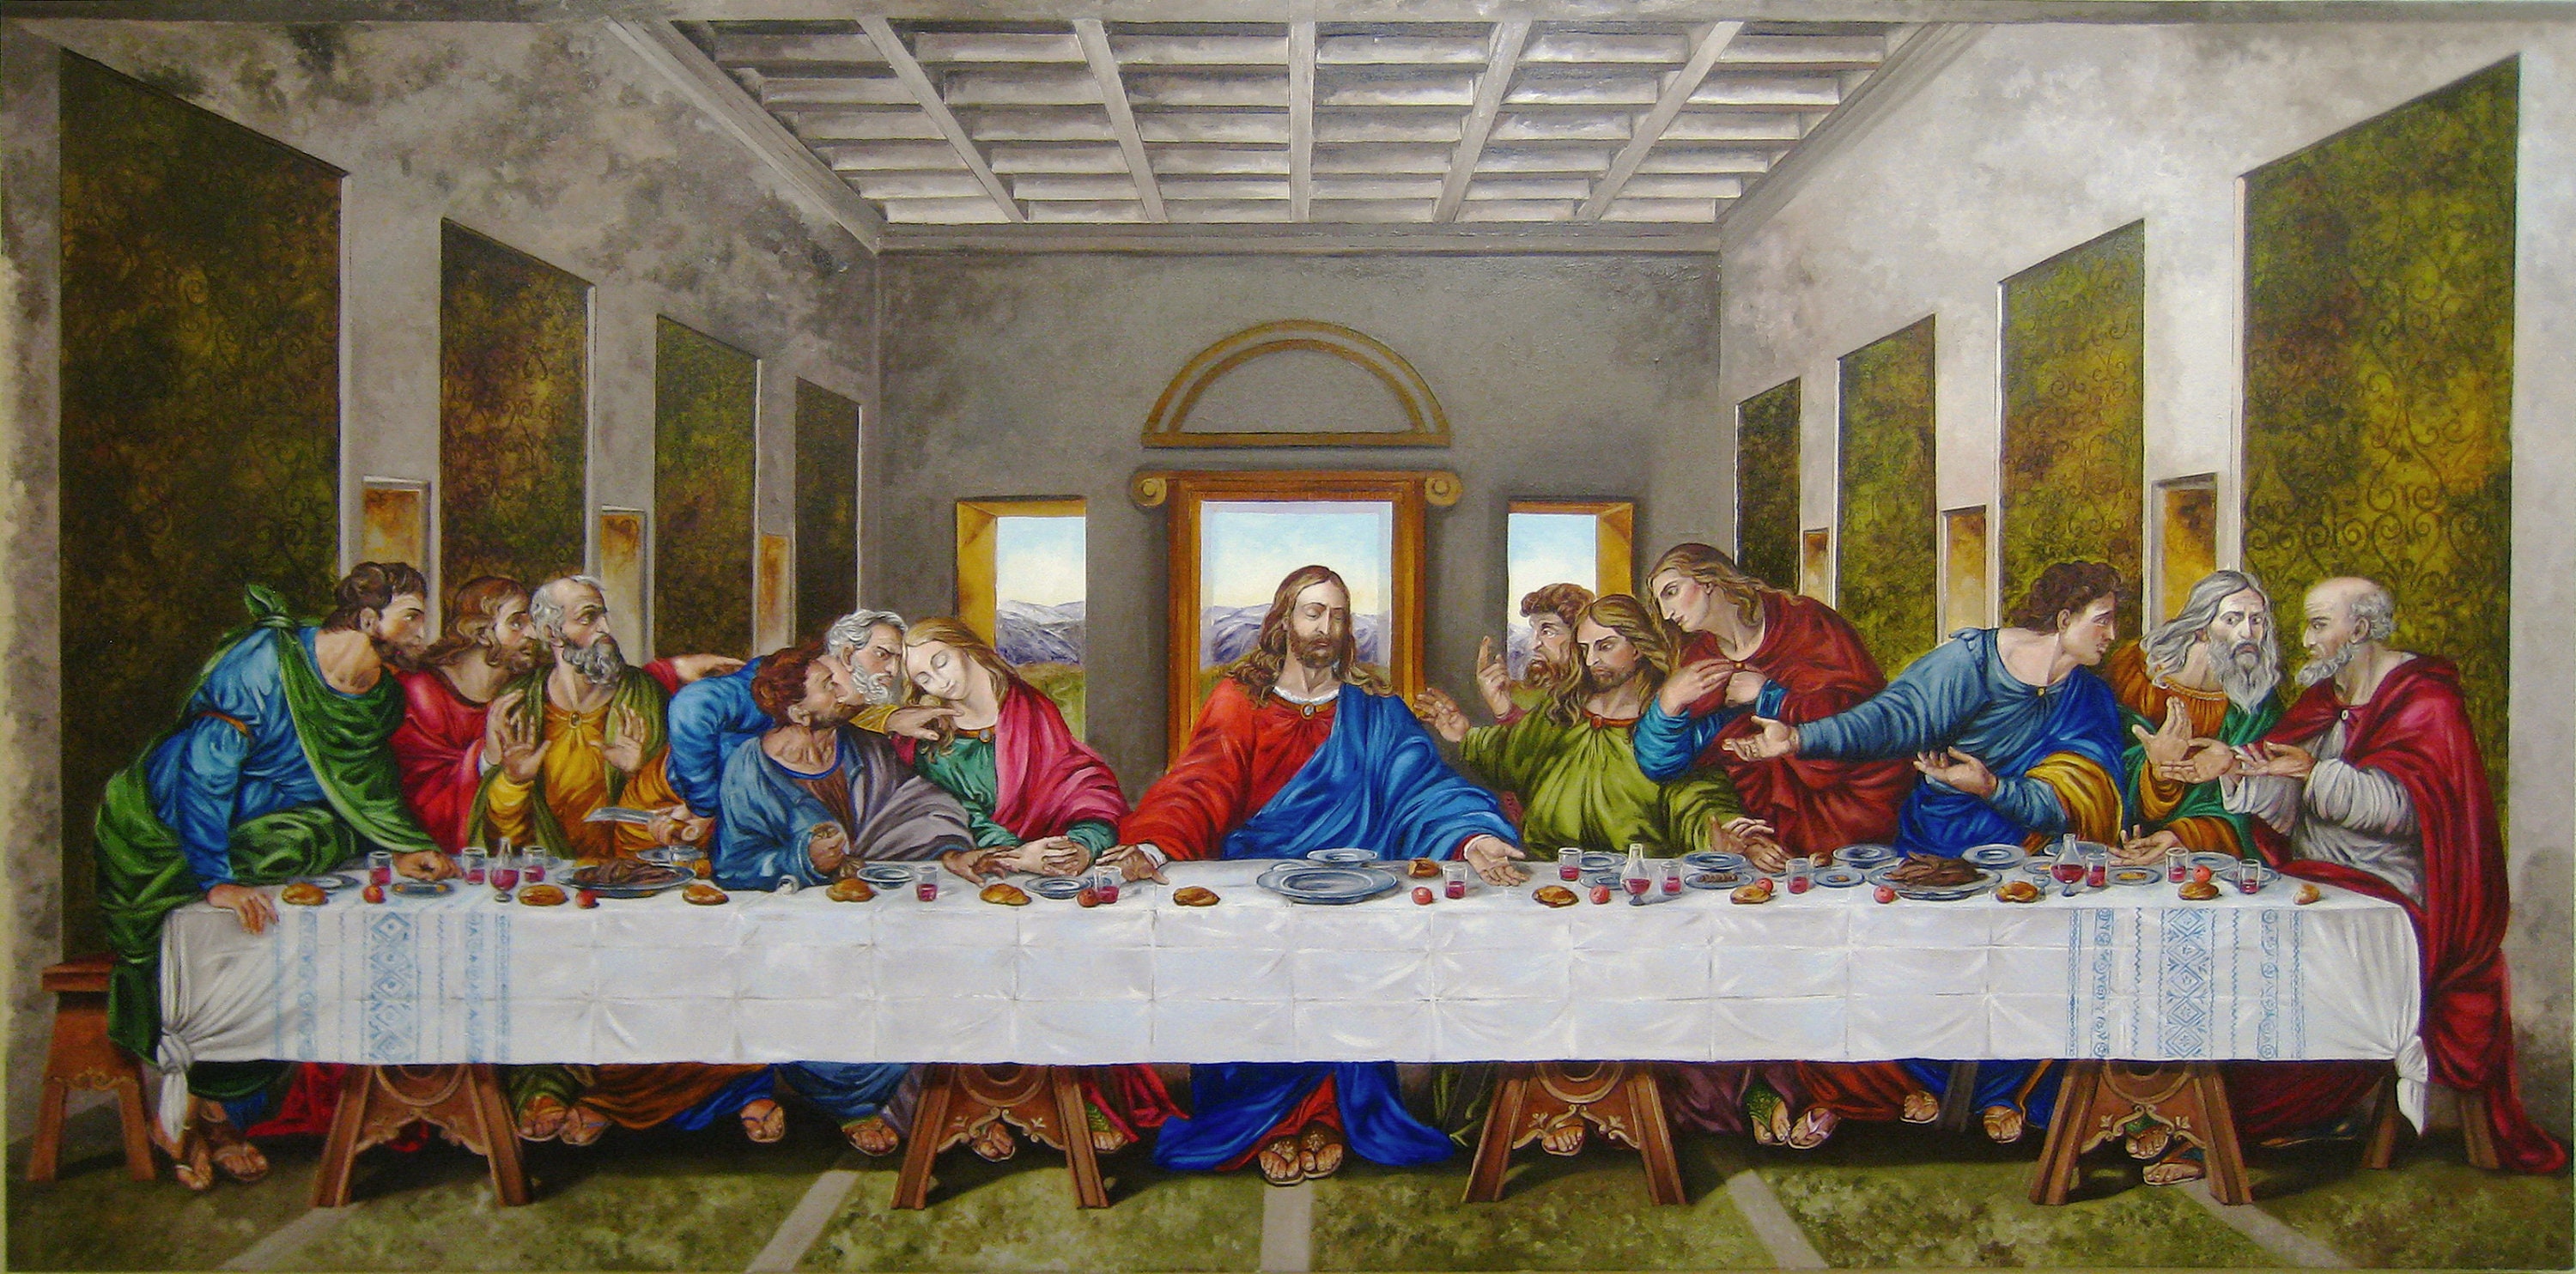 Last Supper With Jesus Painting www.np.gov.lk